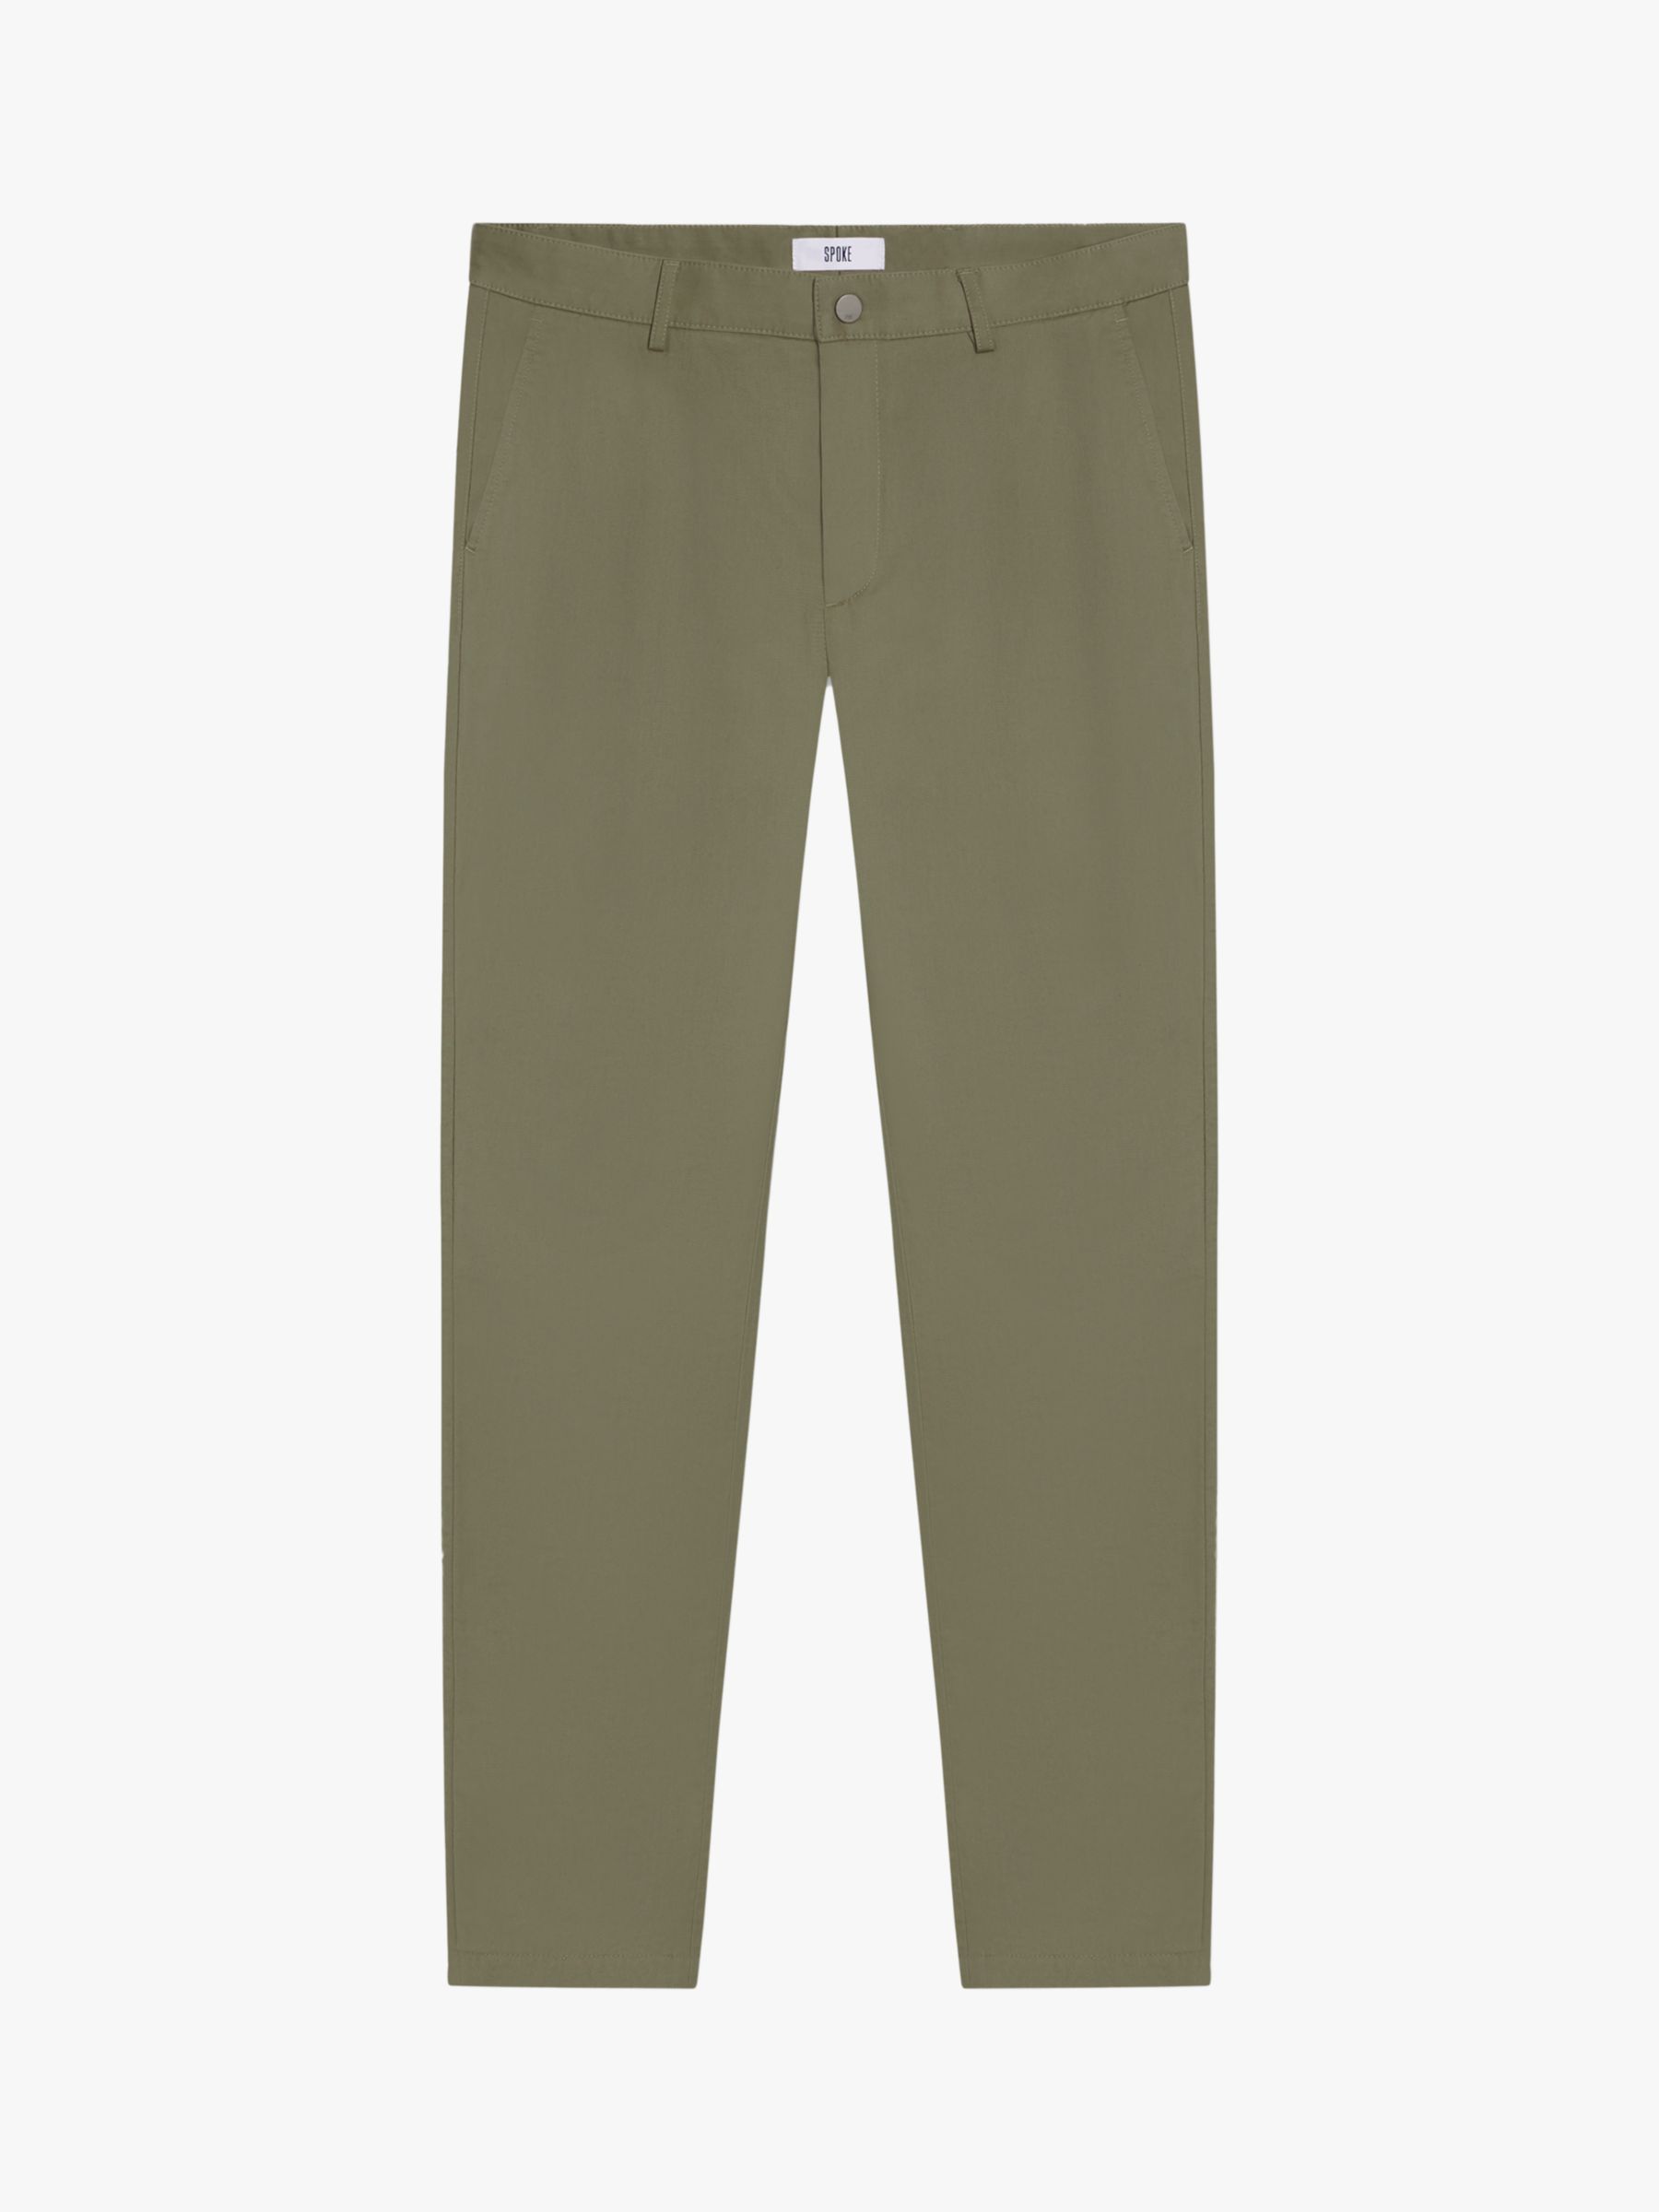 SPOKE Heroes Cotton Blend Narrow Thigh Chinos, Olive, W30/L28